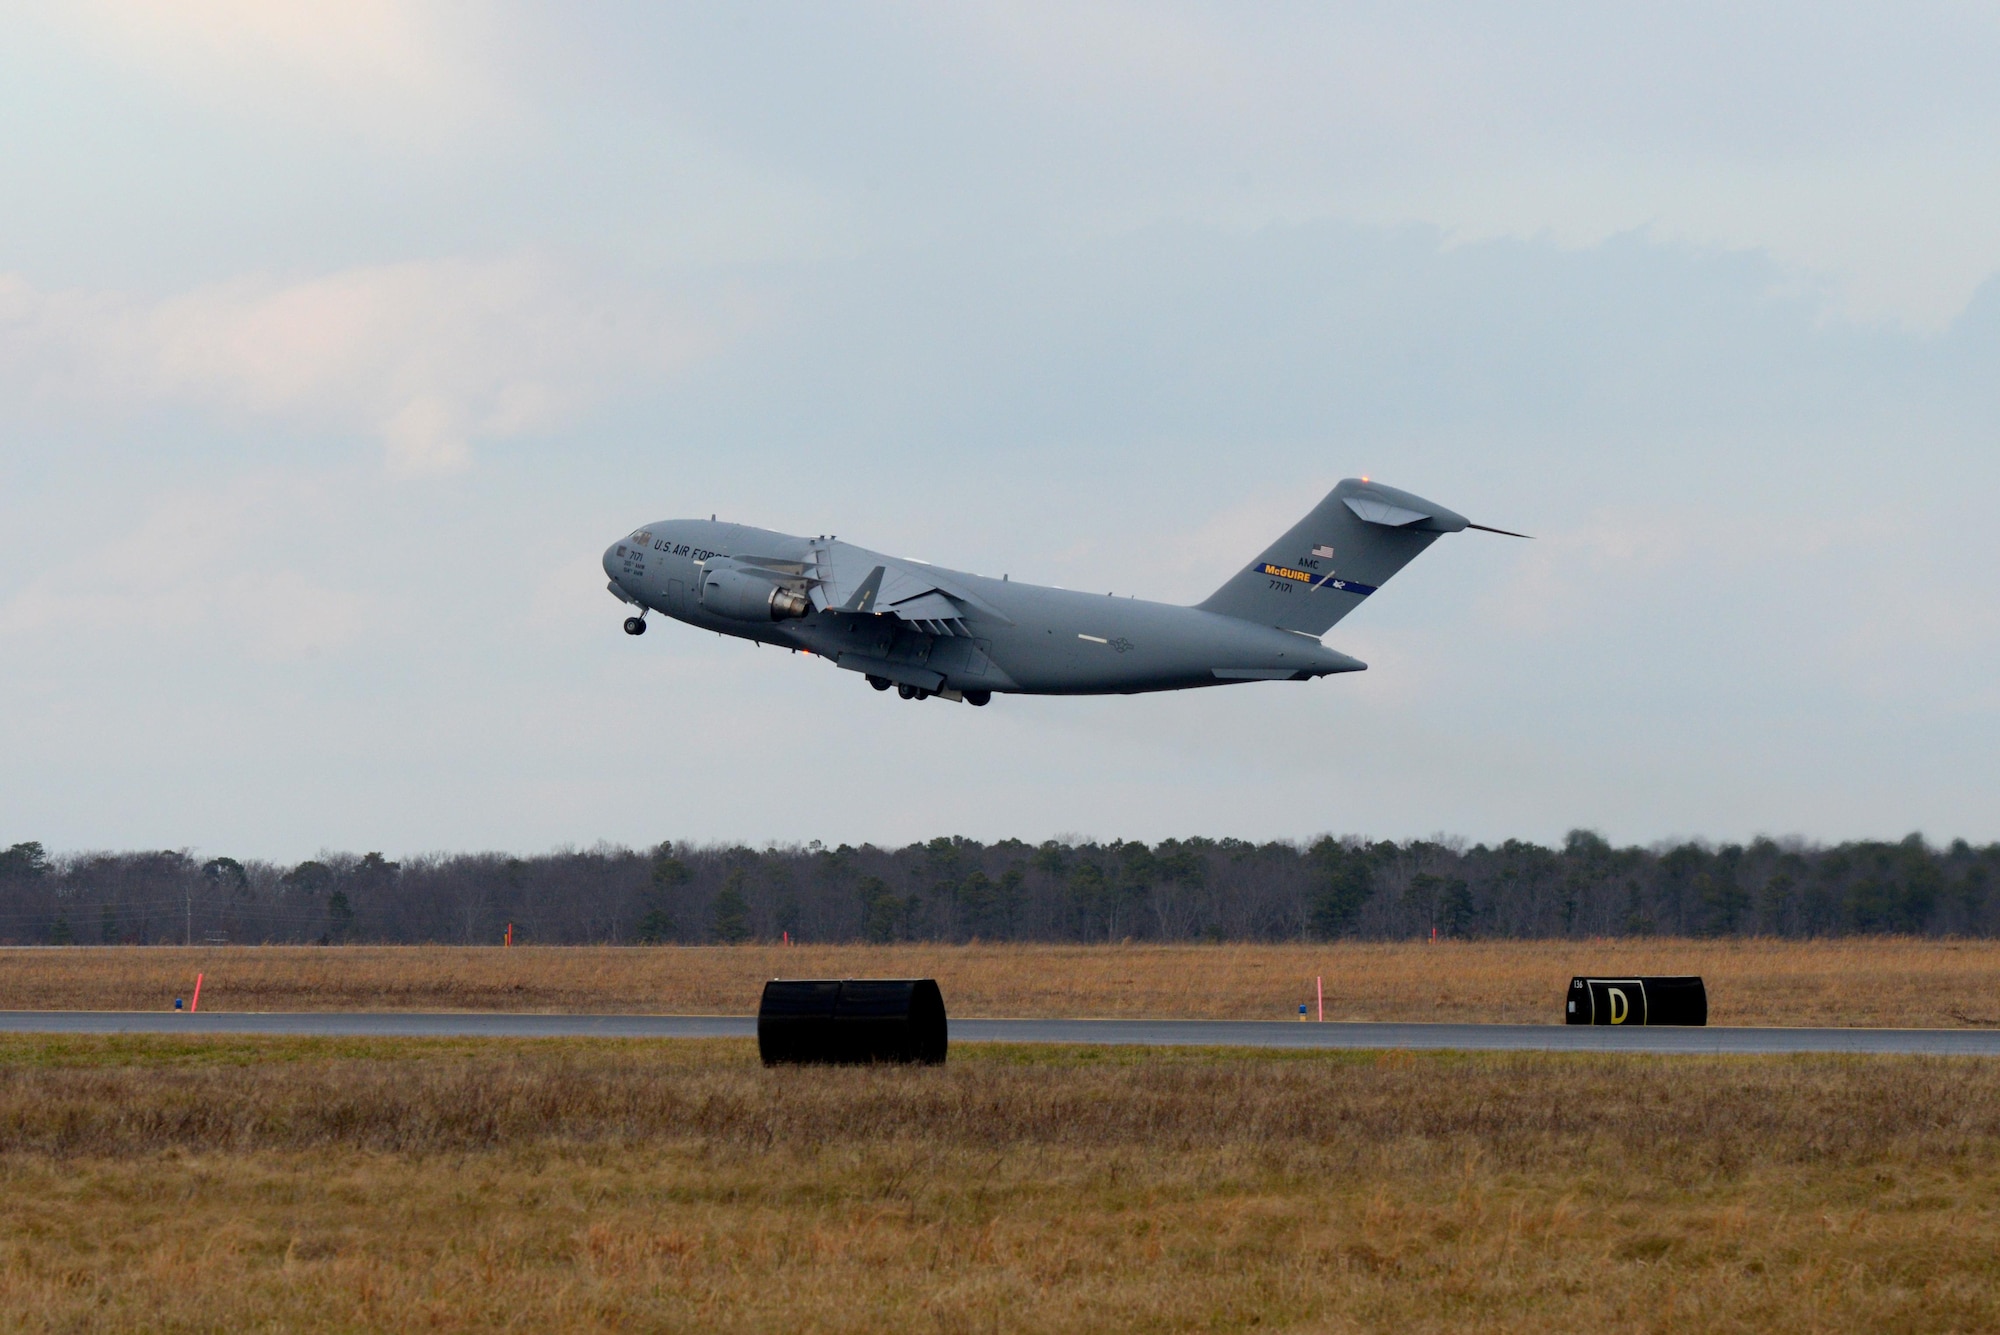 A picture of a U.S. Air Force C-17 Globemaster III lifting off from the runway at the Atlantic City Air National Guard Base, N.J.